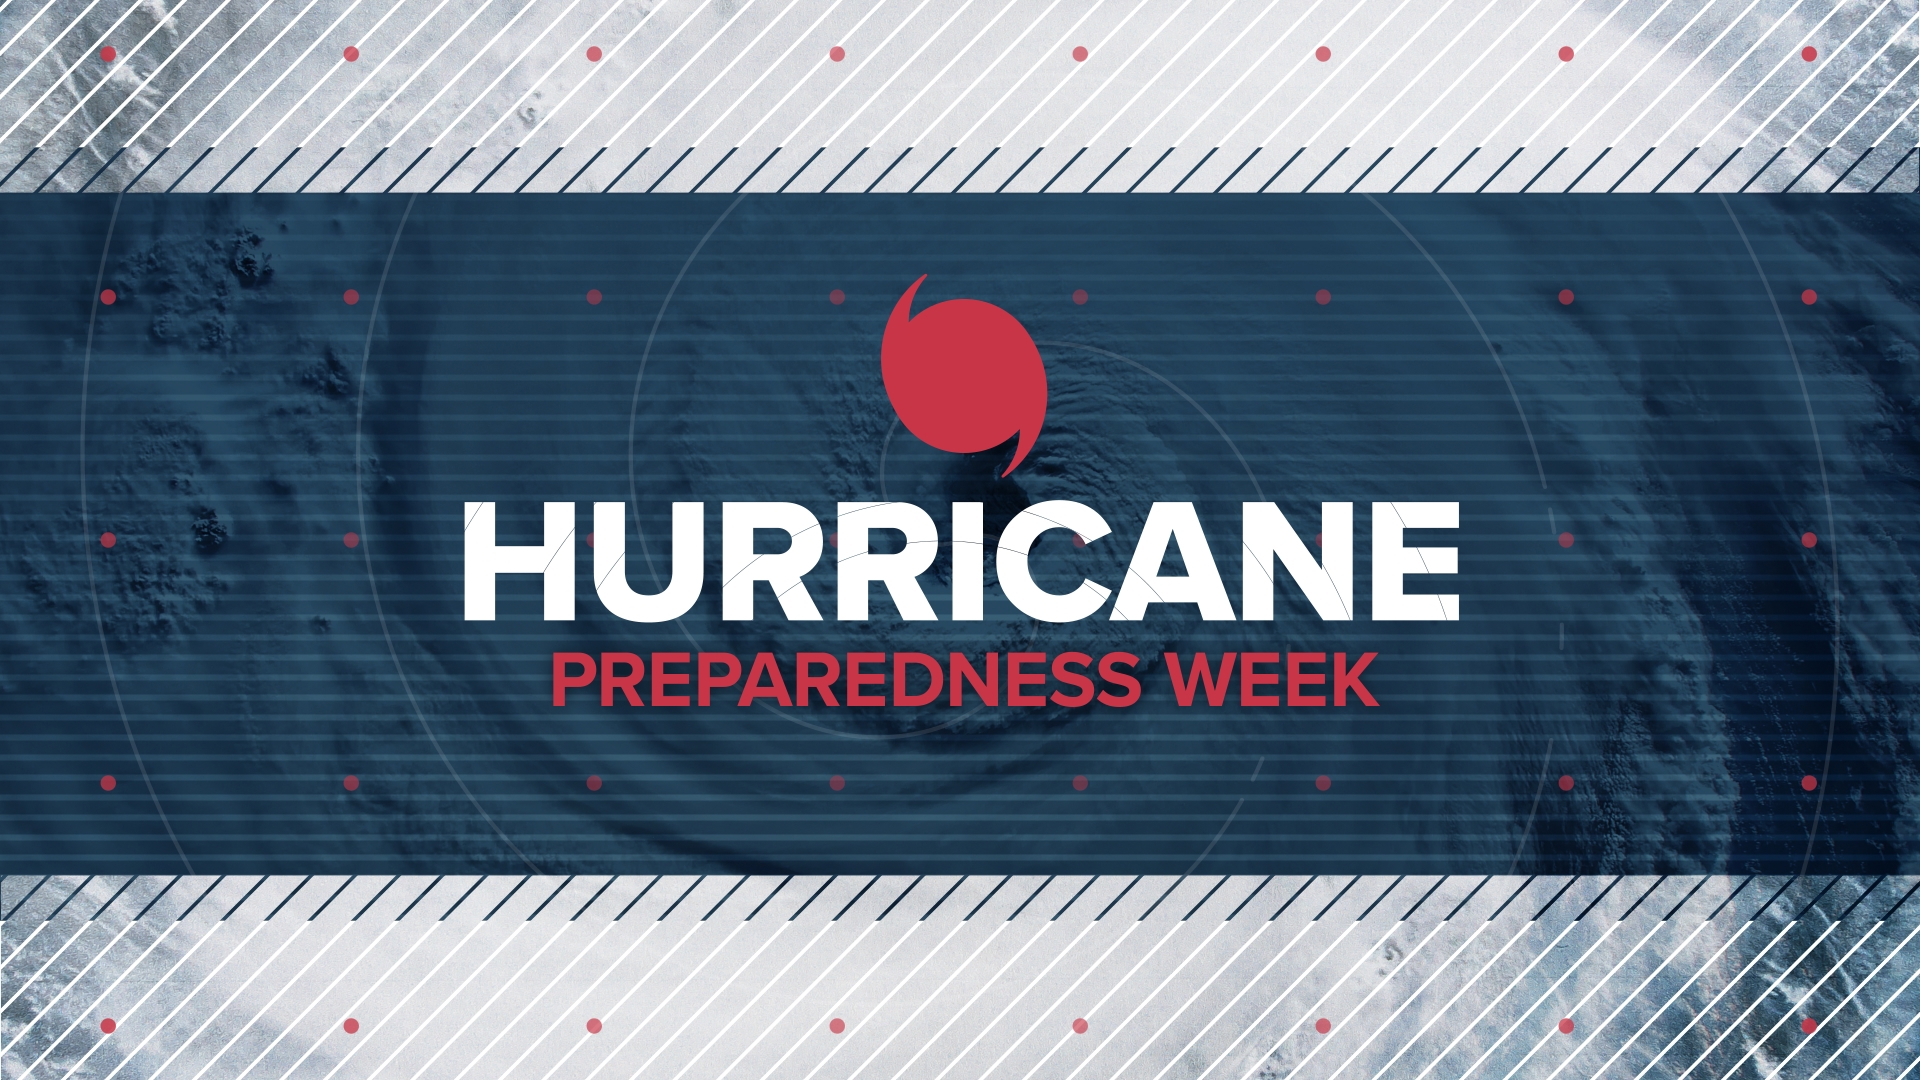 KHOU 11 meteorologists get you ready for what is expected to be a busy hurricane season.